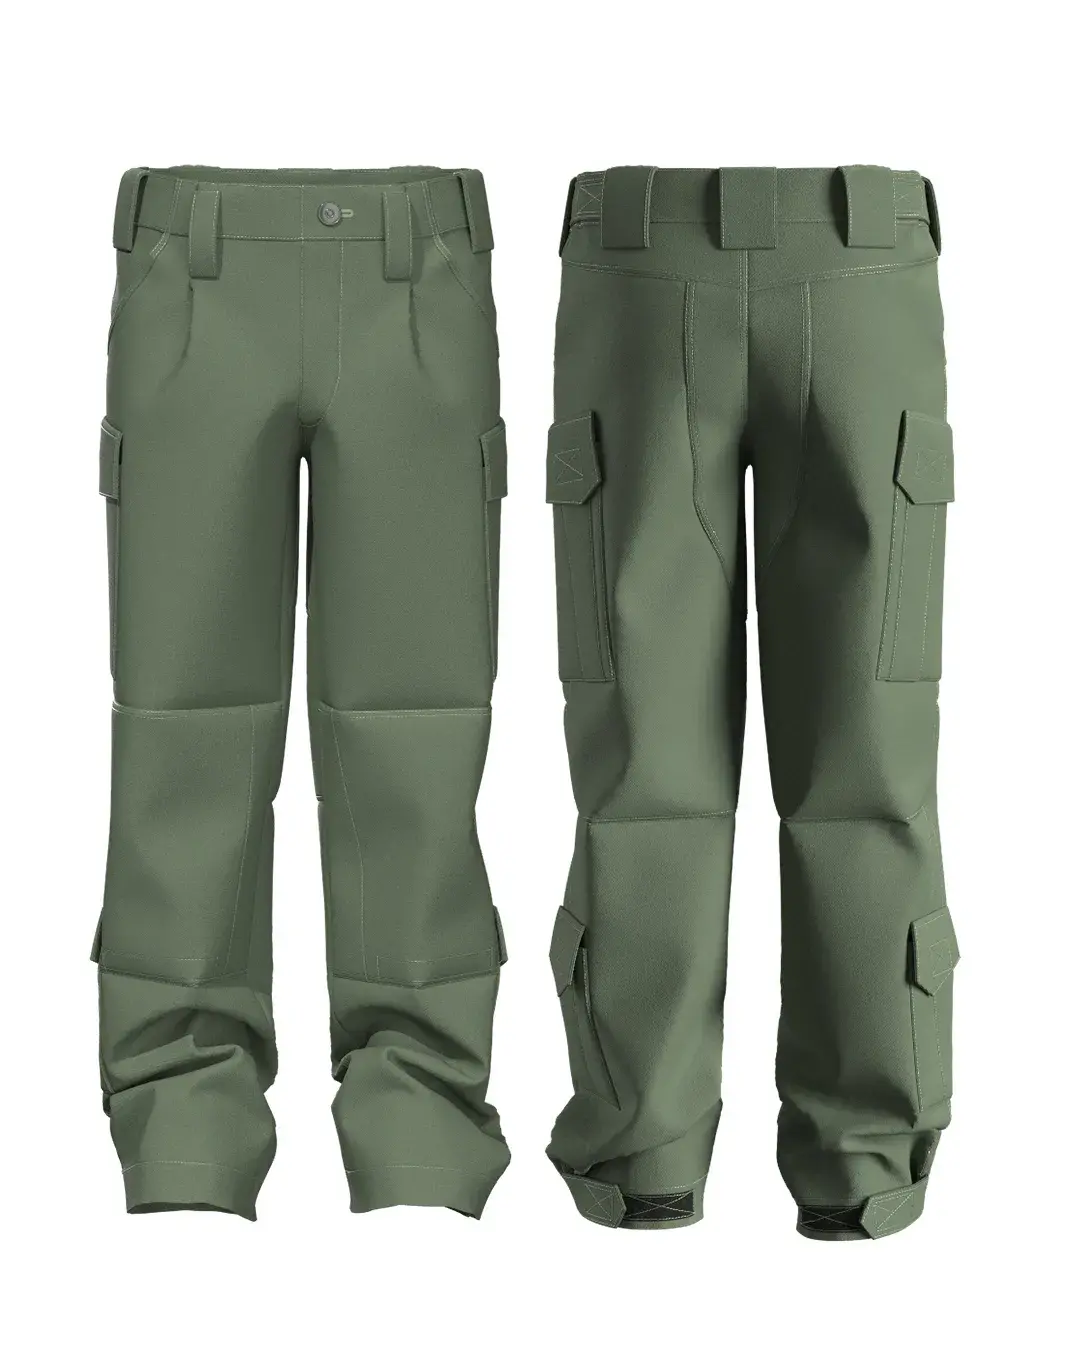 Pants from the summer field uniform (2023)